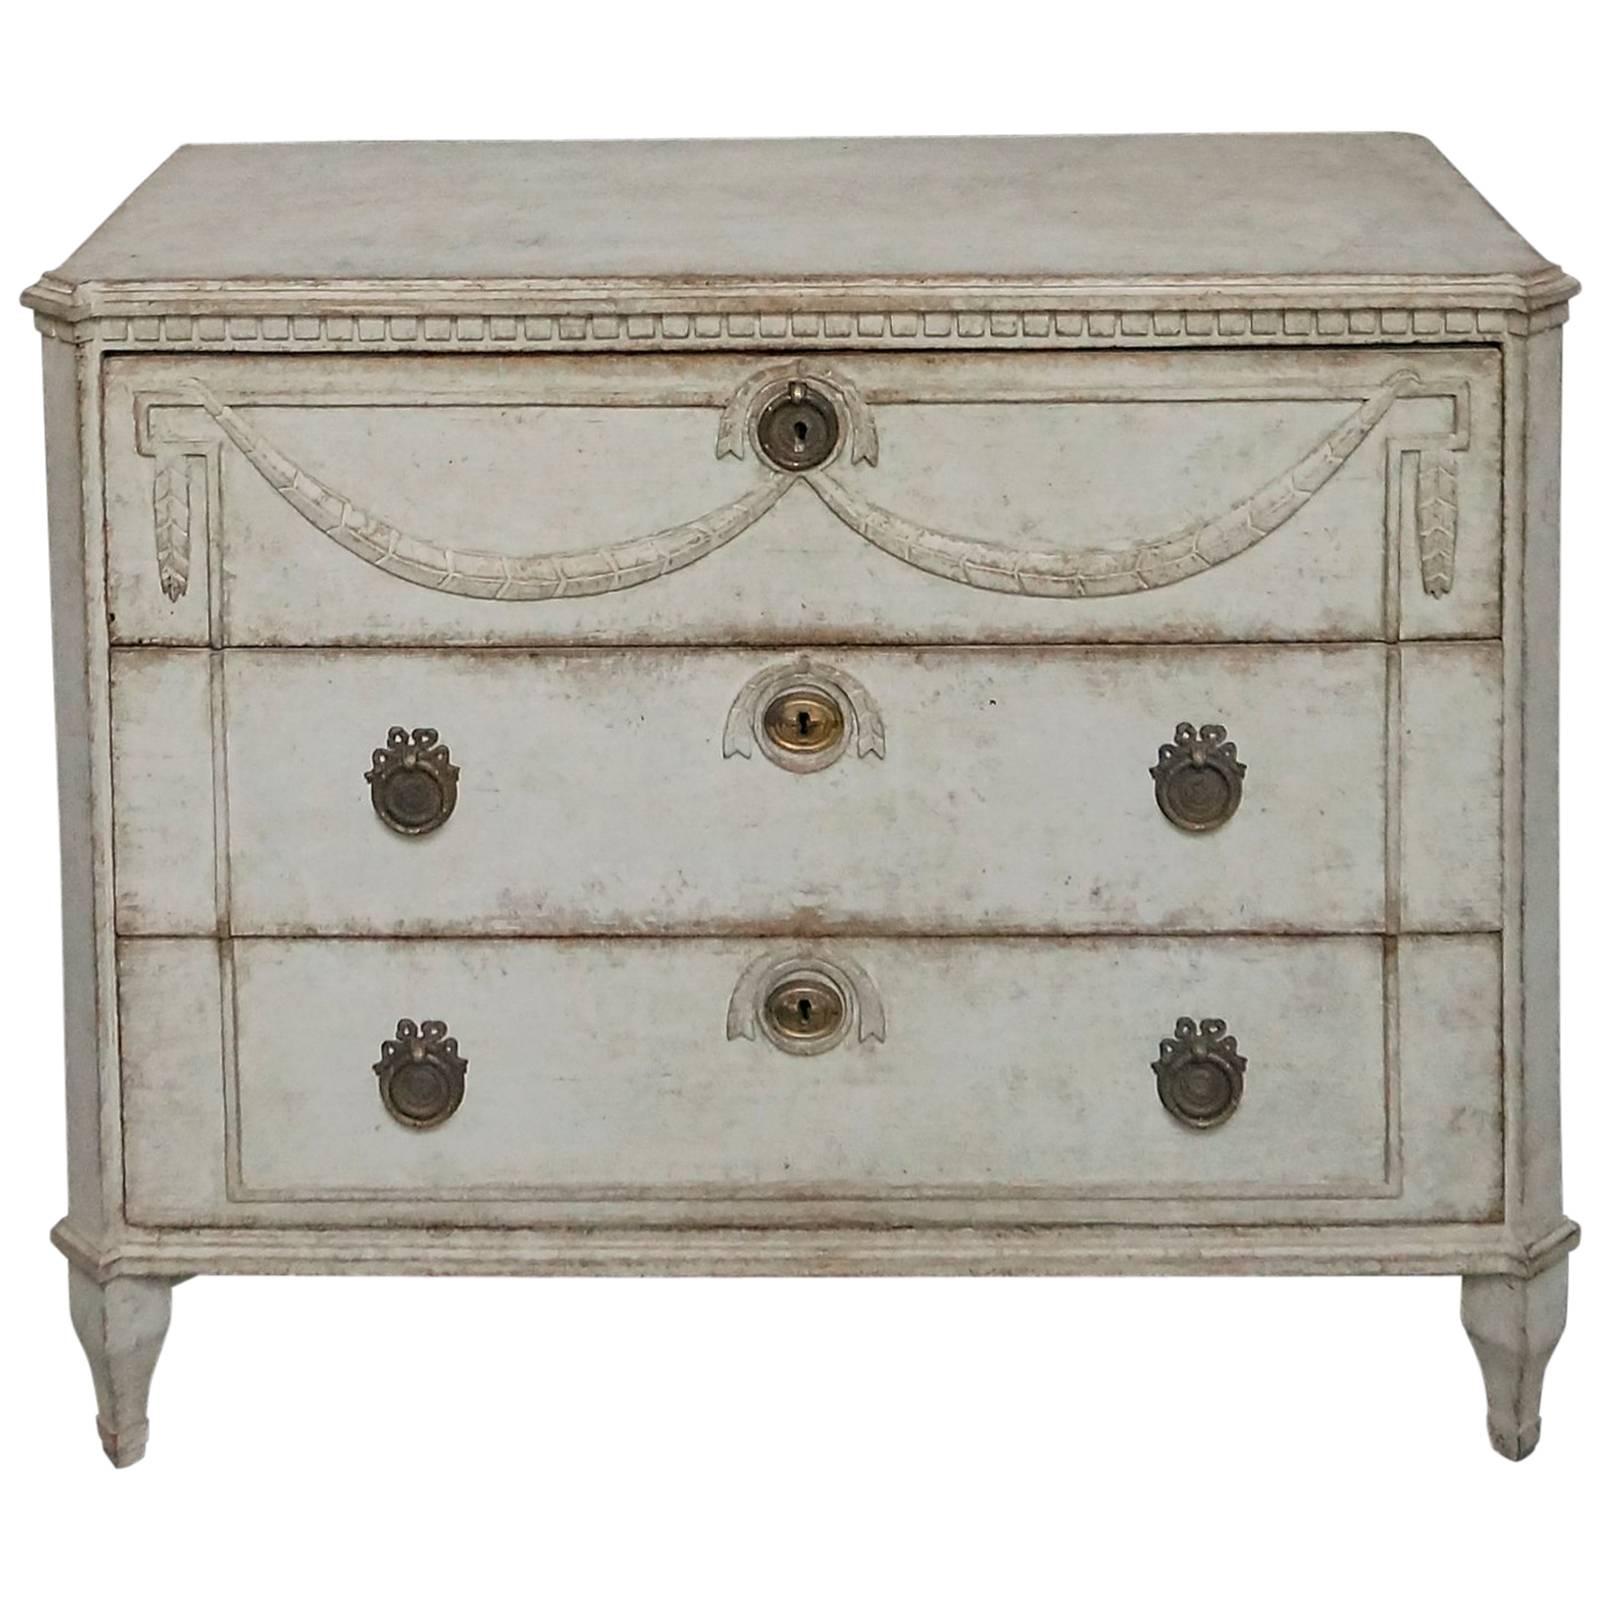 Beautifully Detailed Swedish Neoclassical Chest of Drawers